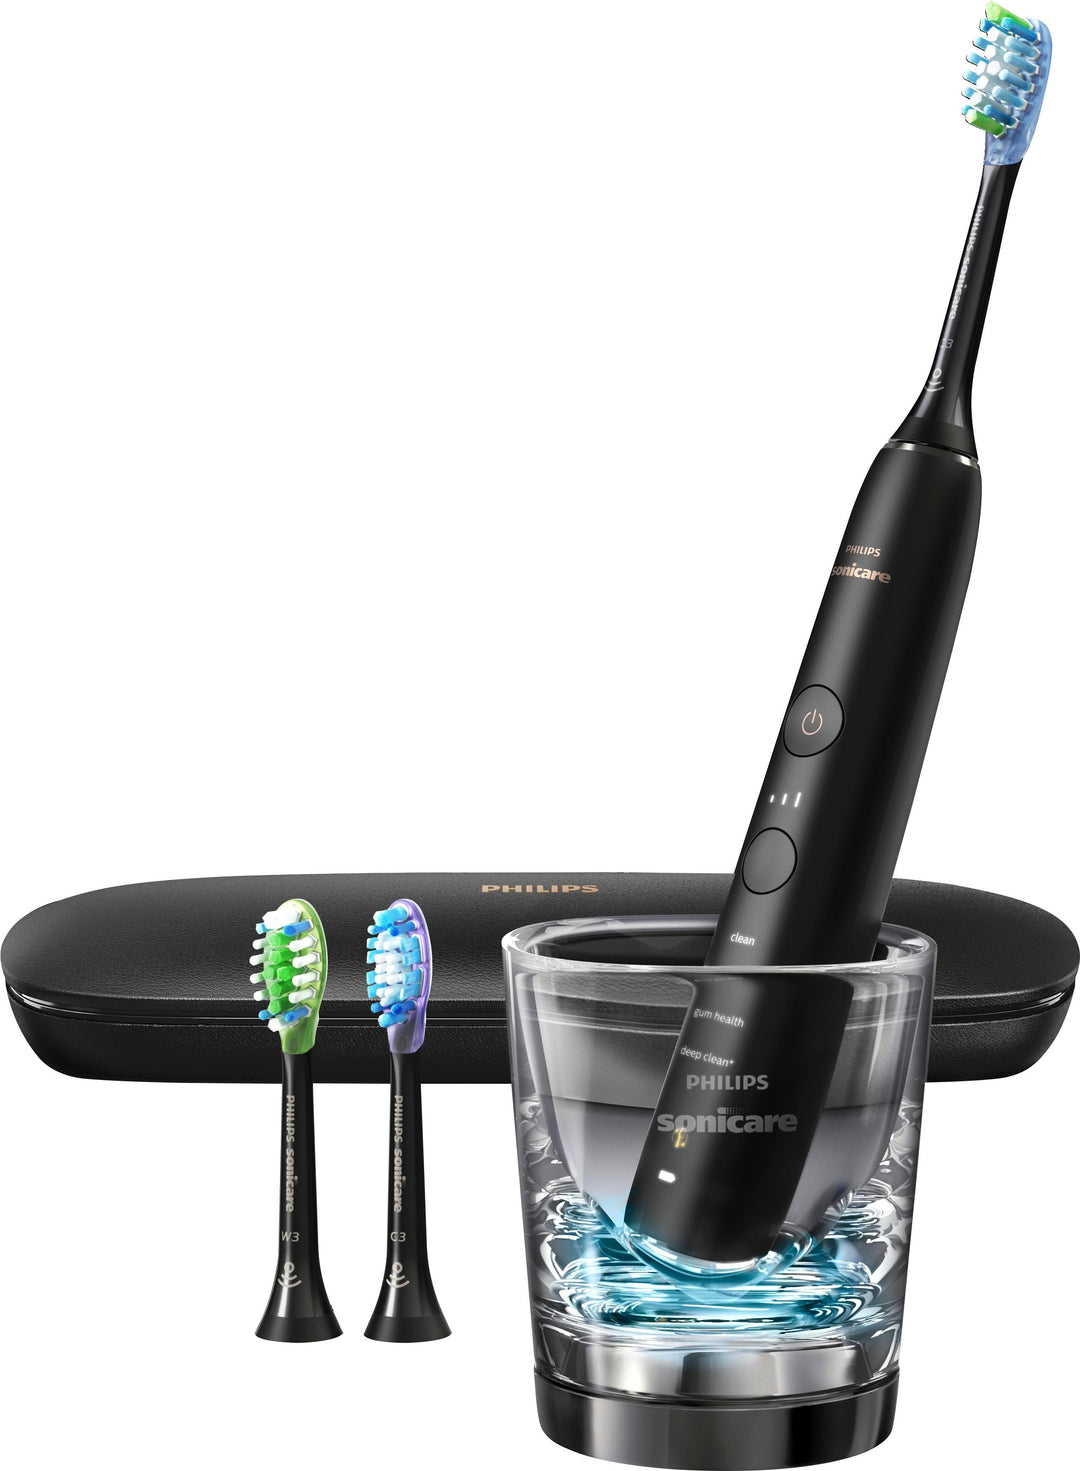 Philips Sonicare - DiamondClean Smart 9300 Rechargeable Toothbrush - Black_3